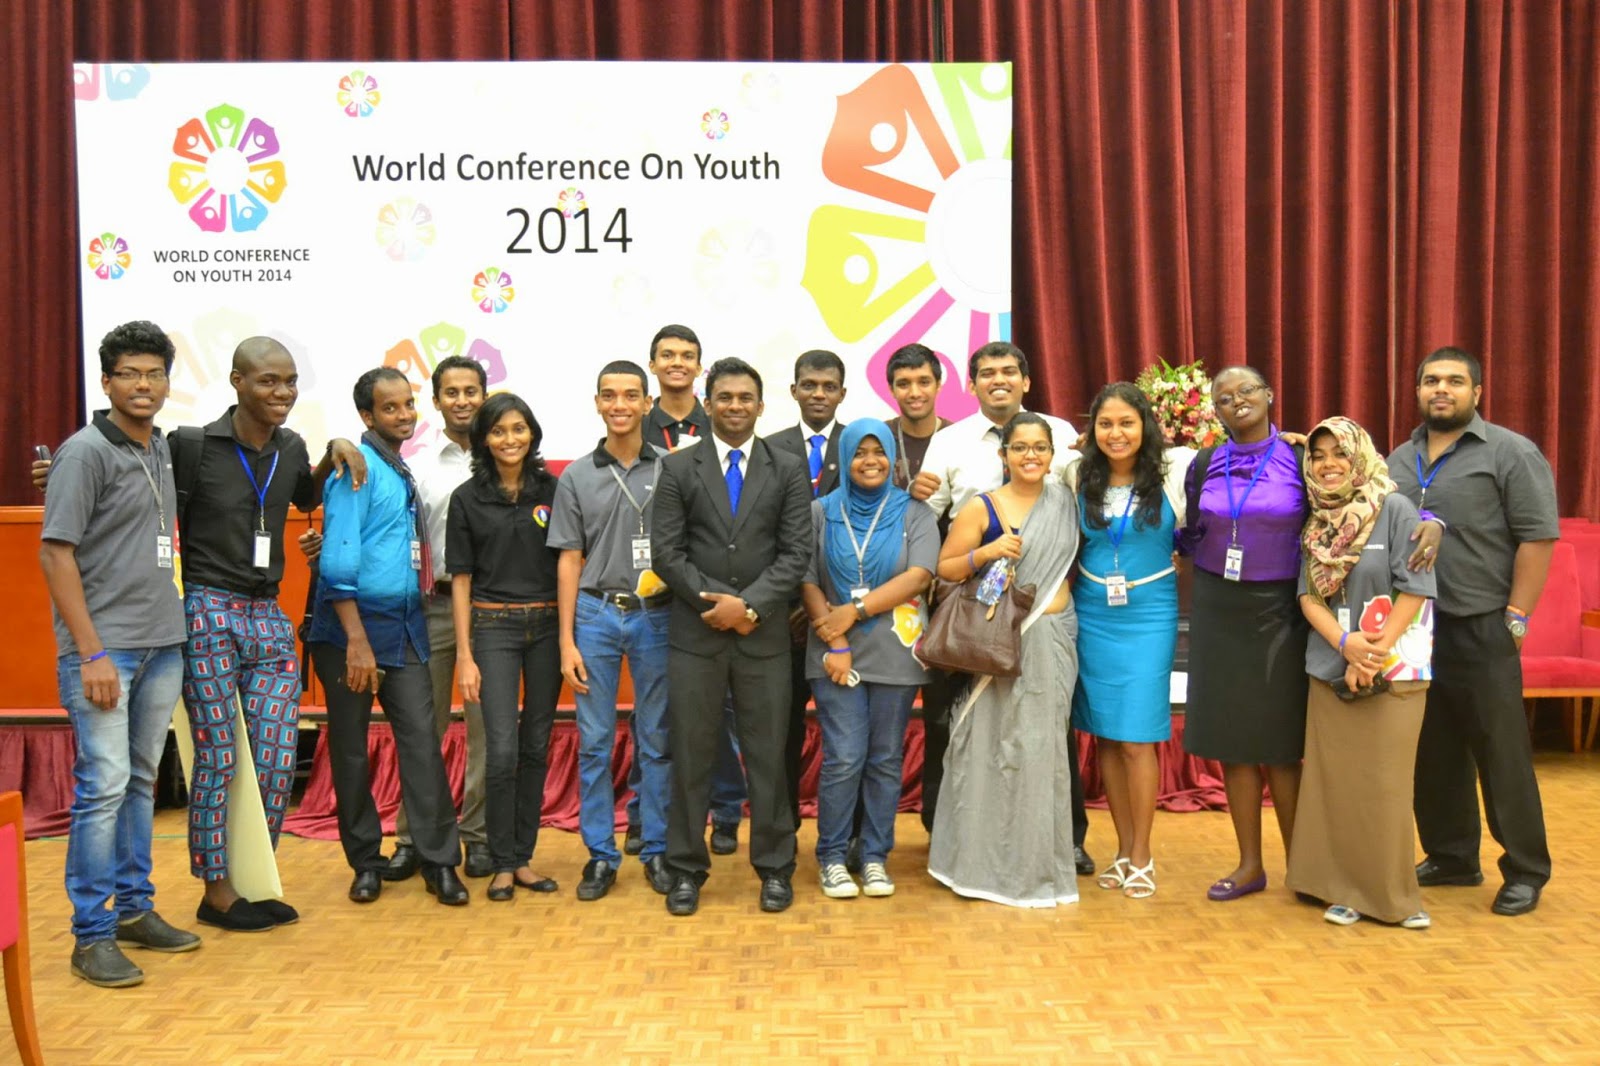 Sri Lanka Unites Represented at World Conference on Youth and the South Asia Summit on Youth and Human Rights